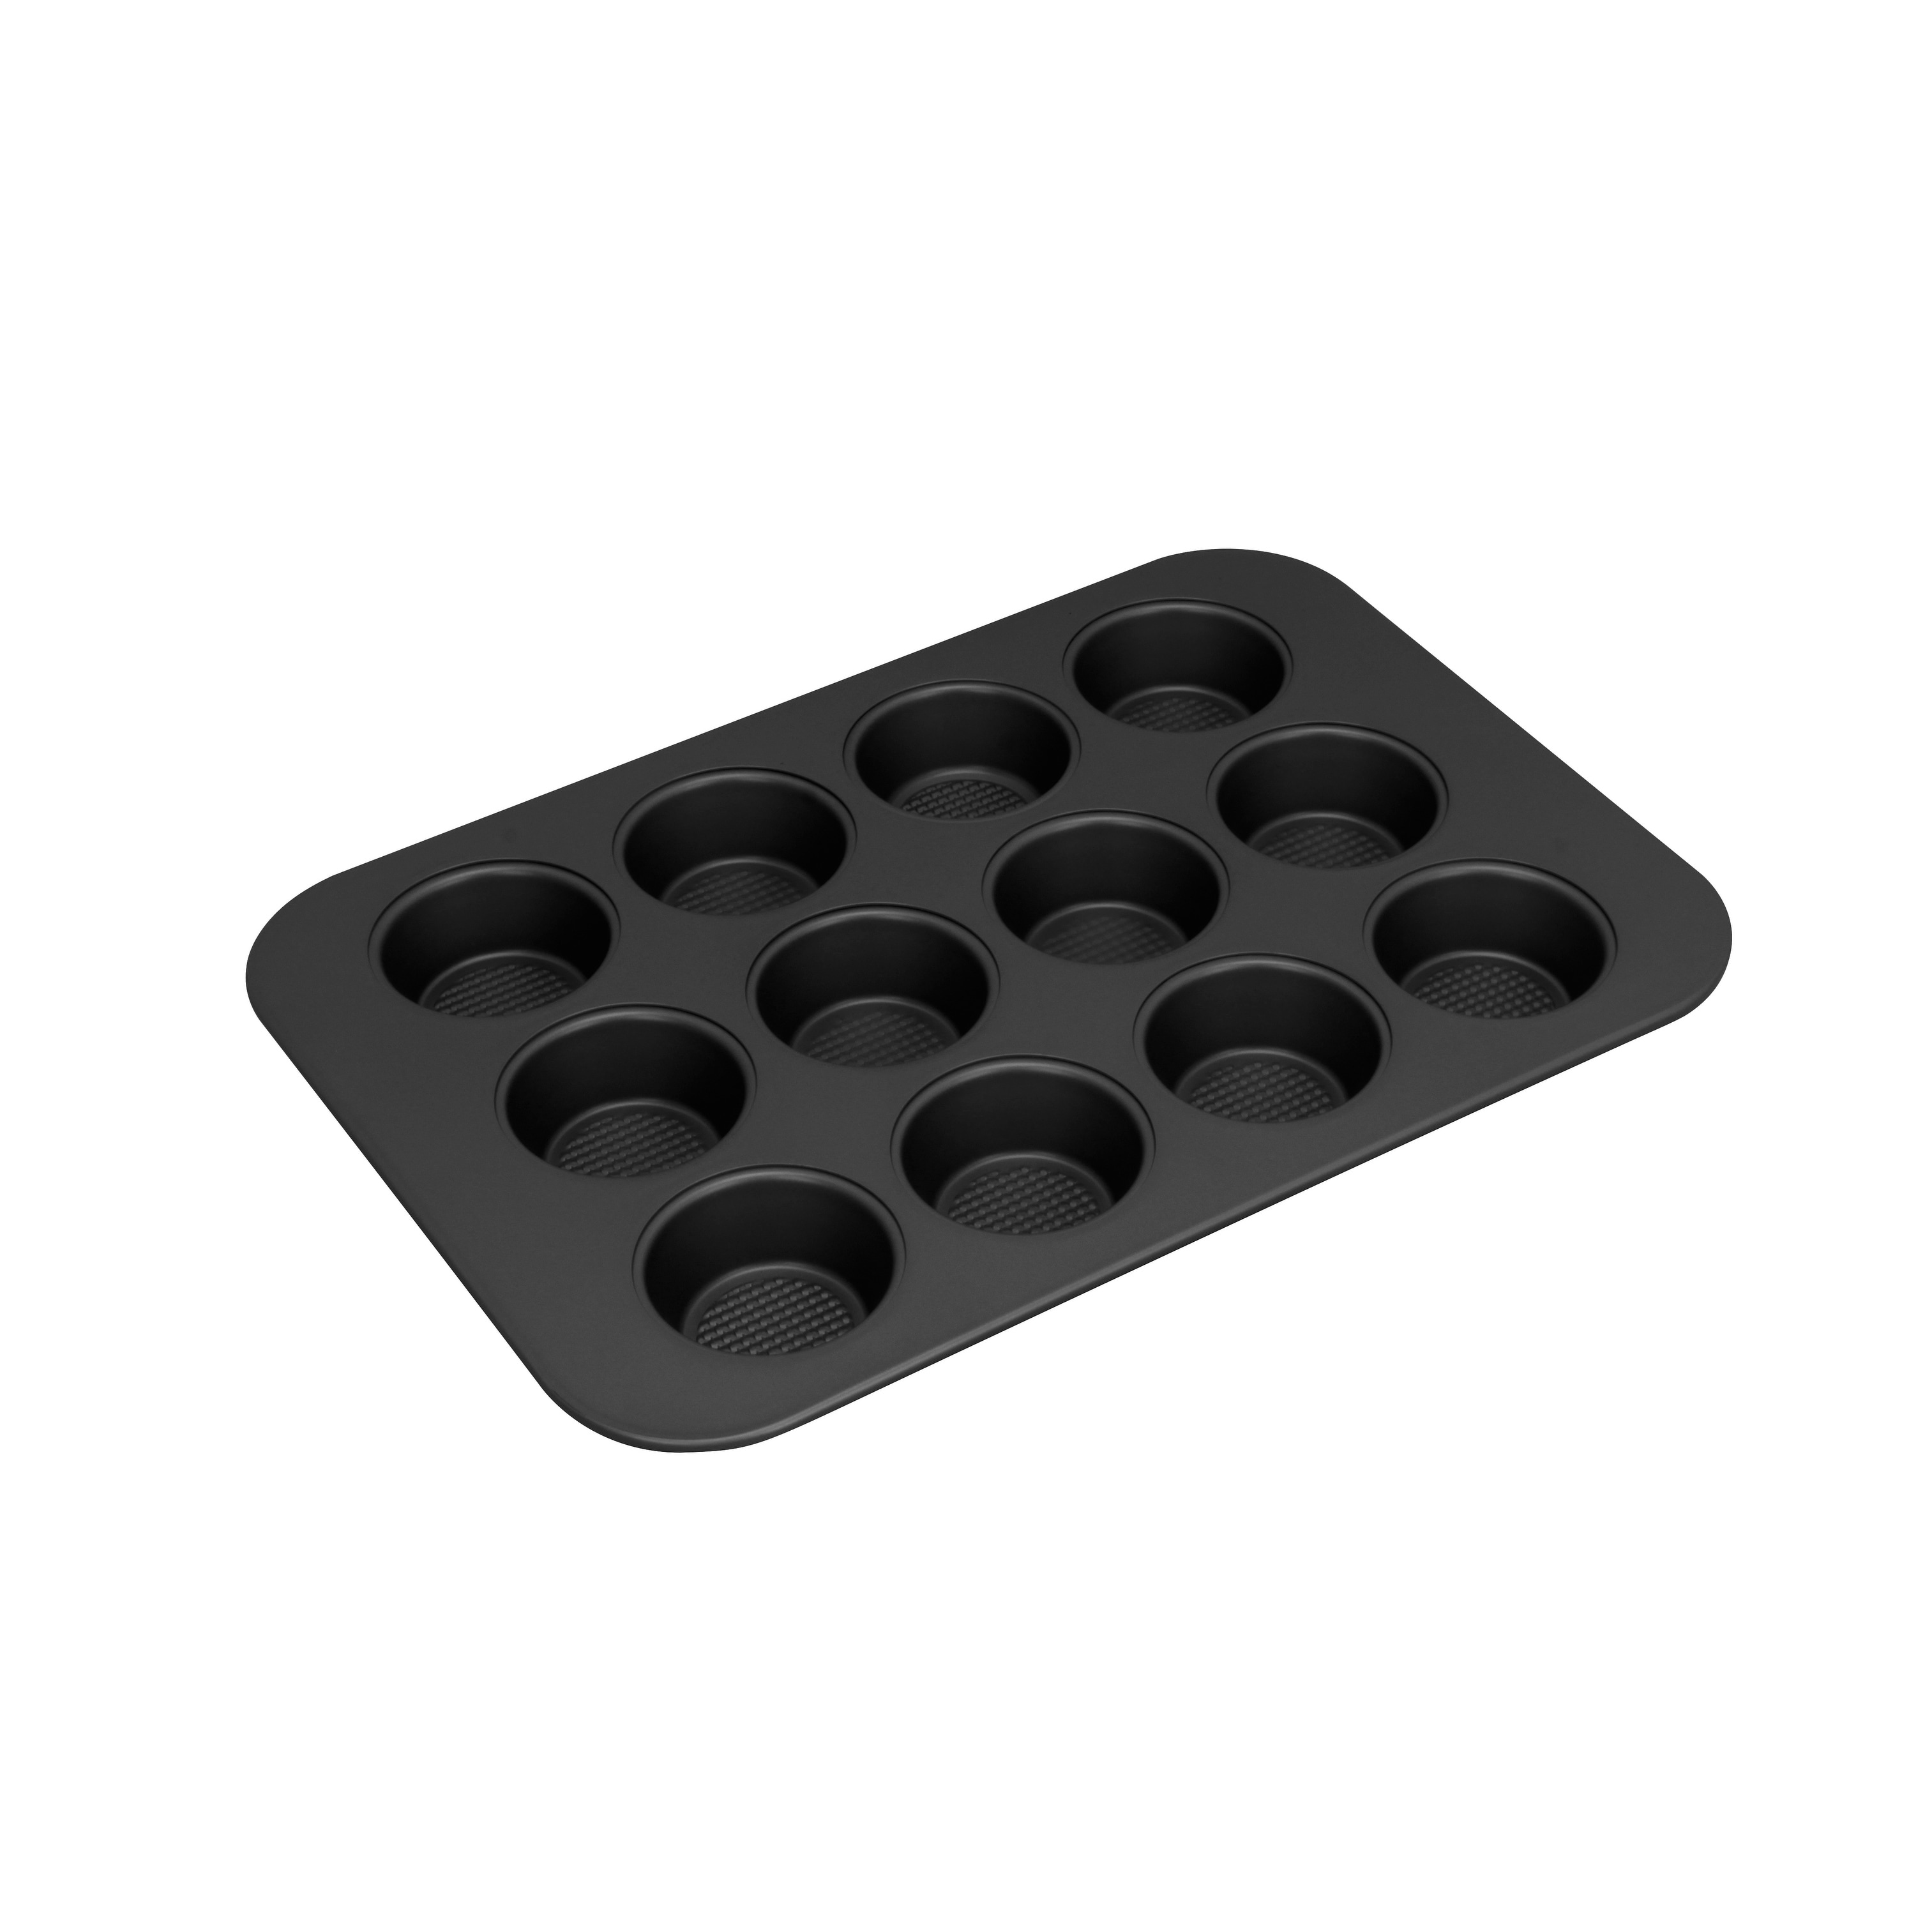 https://ak1.ostkcdn.com/images/products/is/images/direct/b088422d987a9bdcbf6fe50ee70960ee64df9030/Stainless-Steel-12-Cup-Muffin-Baking-Pan-Dishwasher-Safe-16x11%22.jpg